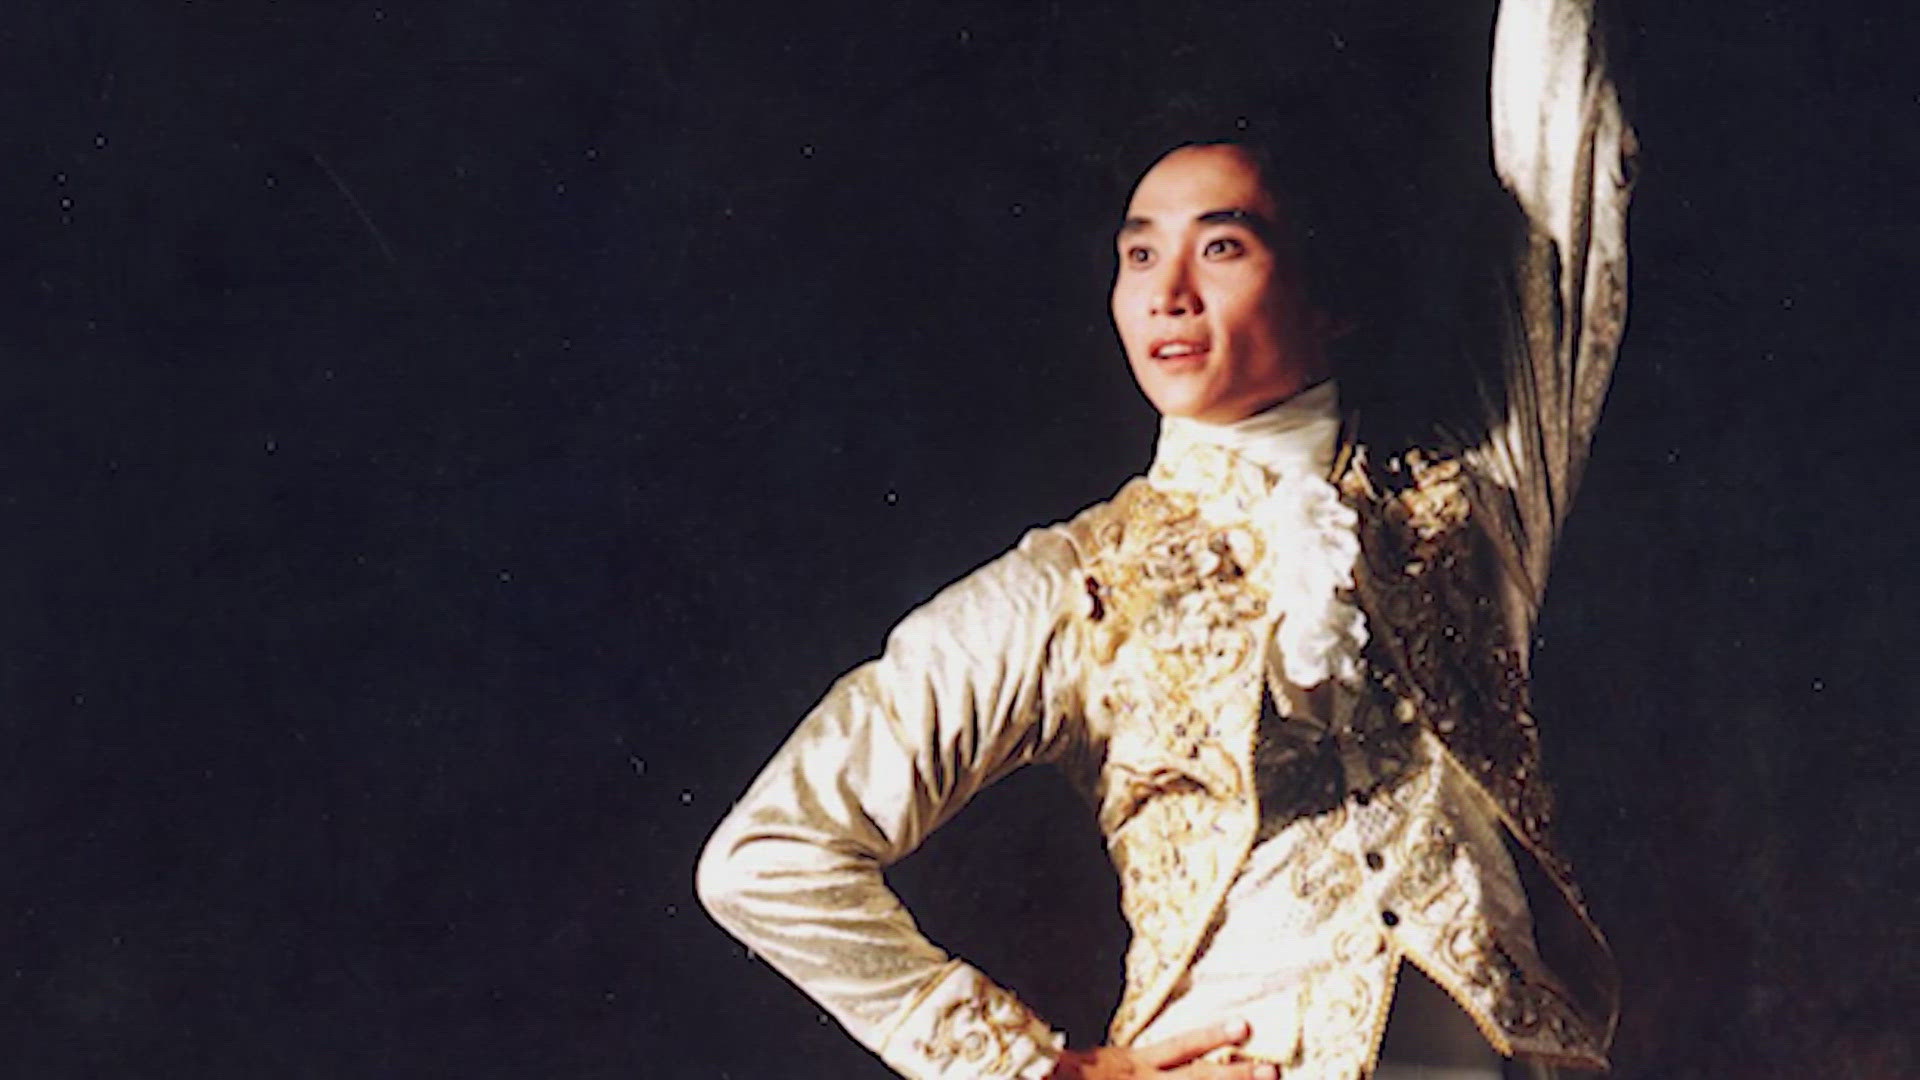 Li Cunxin trained 16 hours a day, six days a week for seven years at the Beijing Ballet Academy until he won a scholarship to study at the Houston Ballet.